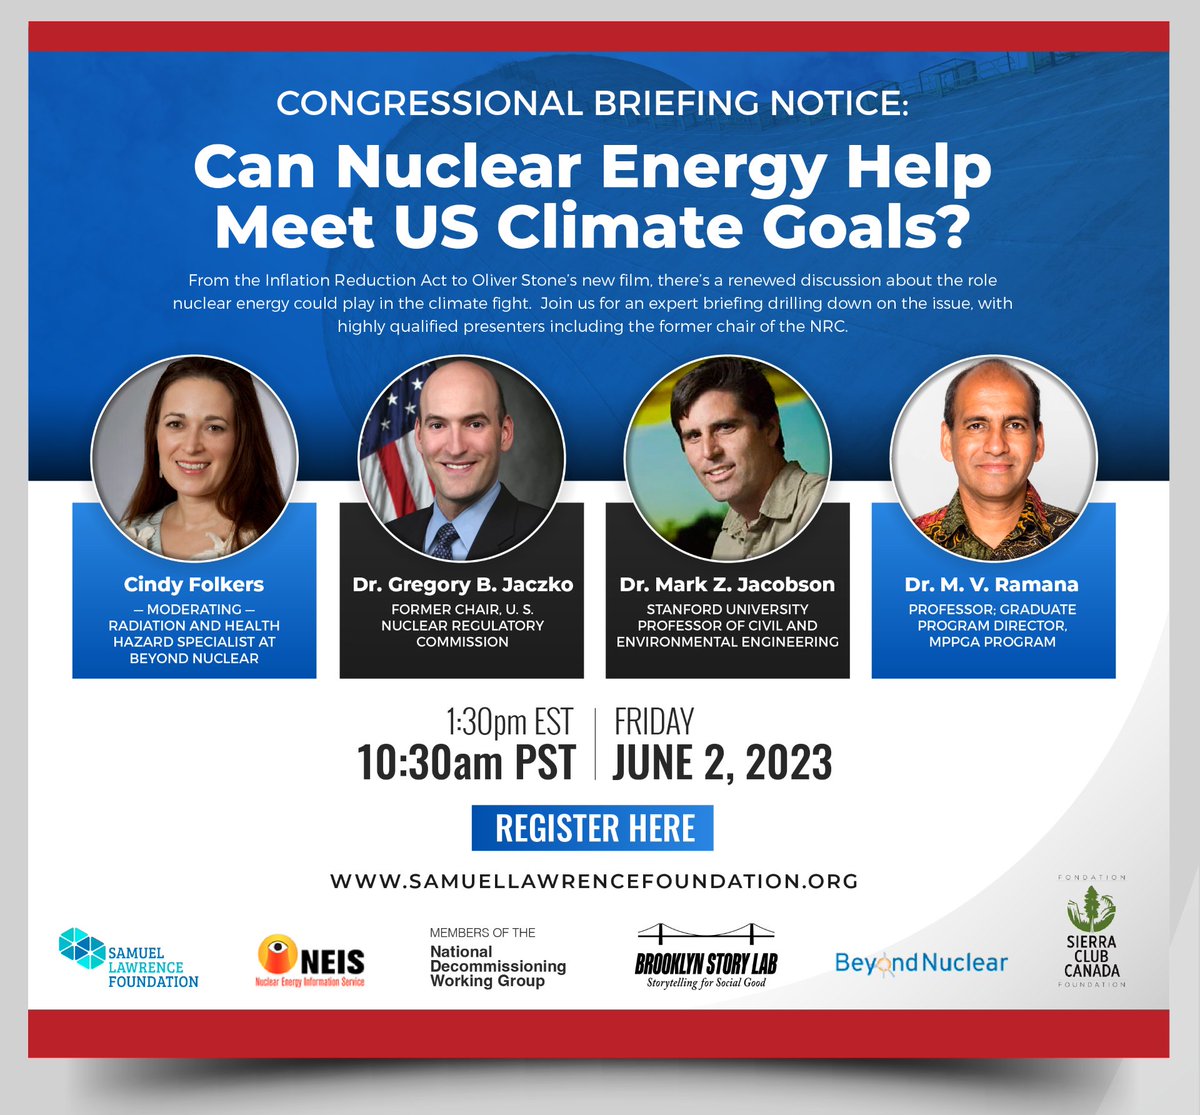 Can Nuclear Energy Help Meet US Climate Goals?
 
June 2nd, 1:30pm EST (10:30am PST)
 
From the Inflation Reduction Act to Oliver Stone’s new film, there’s a renewed discussion about the role nuclear energy could play in the climate fight.

Register: us02web.zoom.us/webinar/regist…